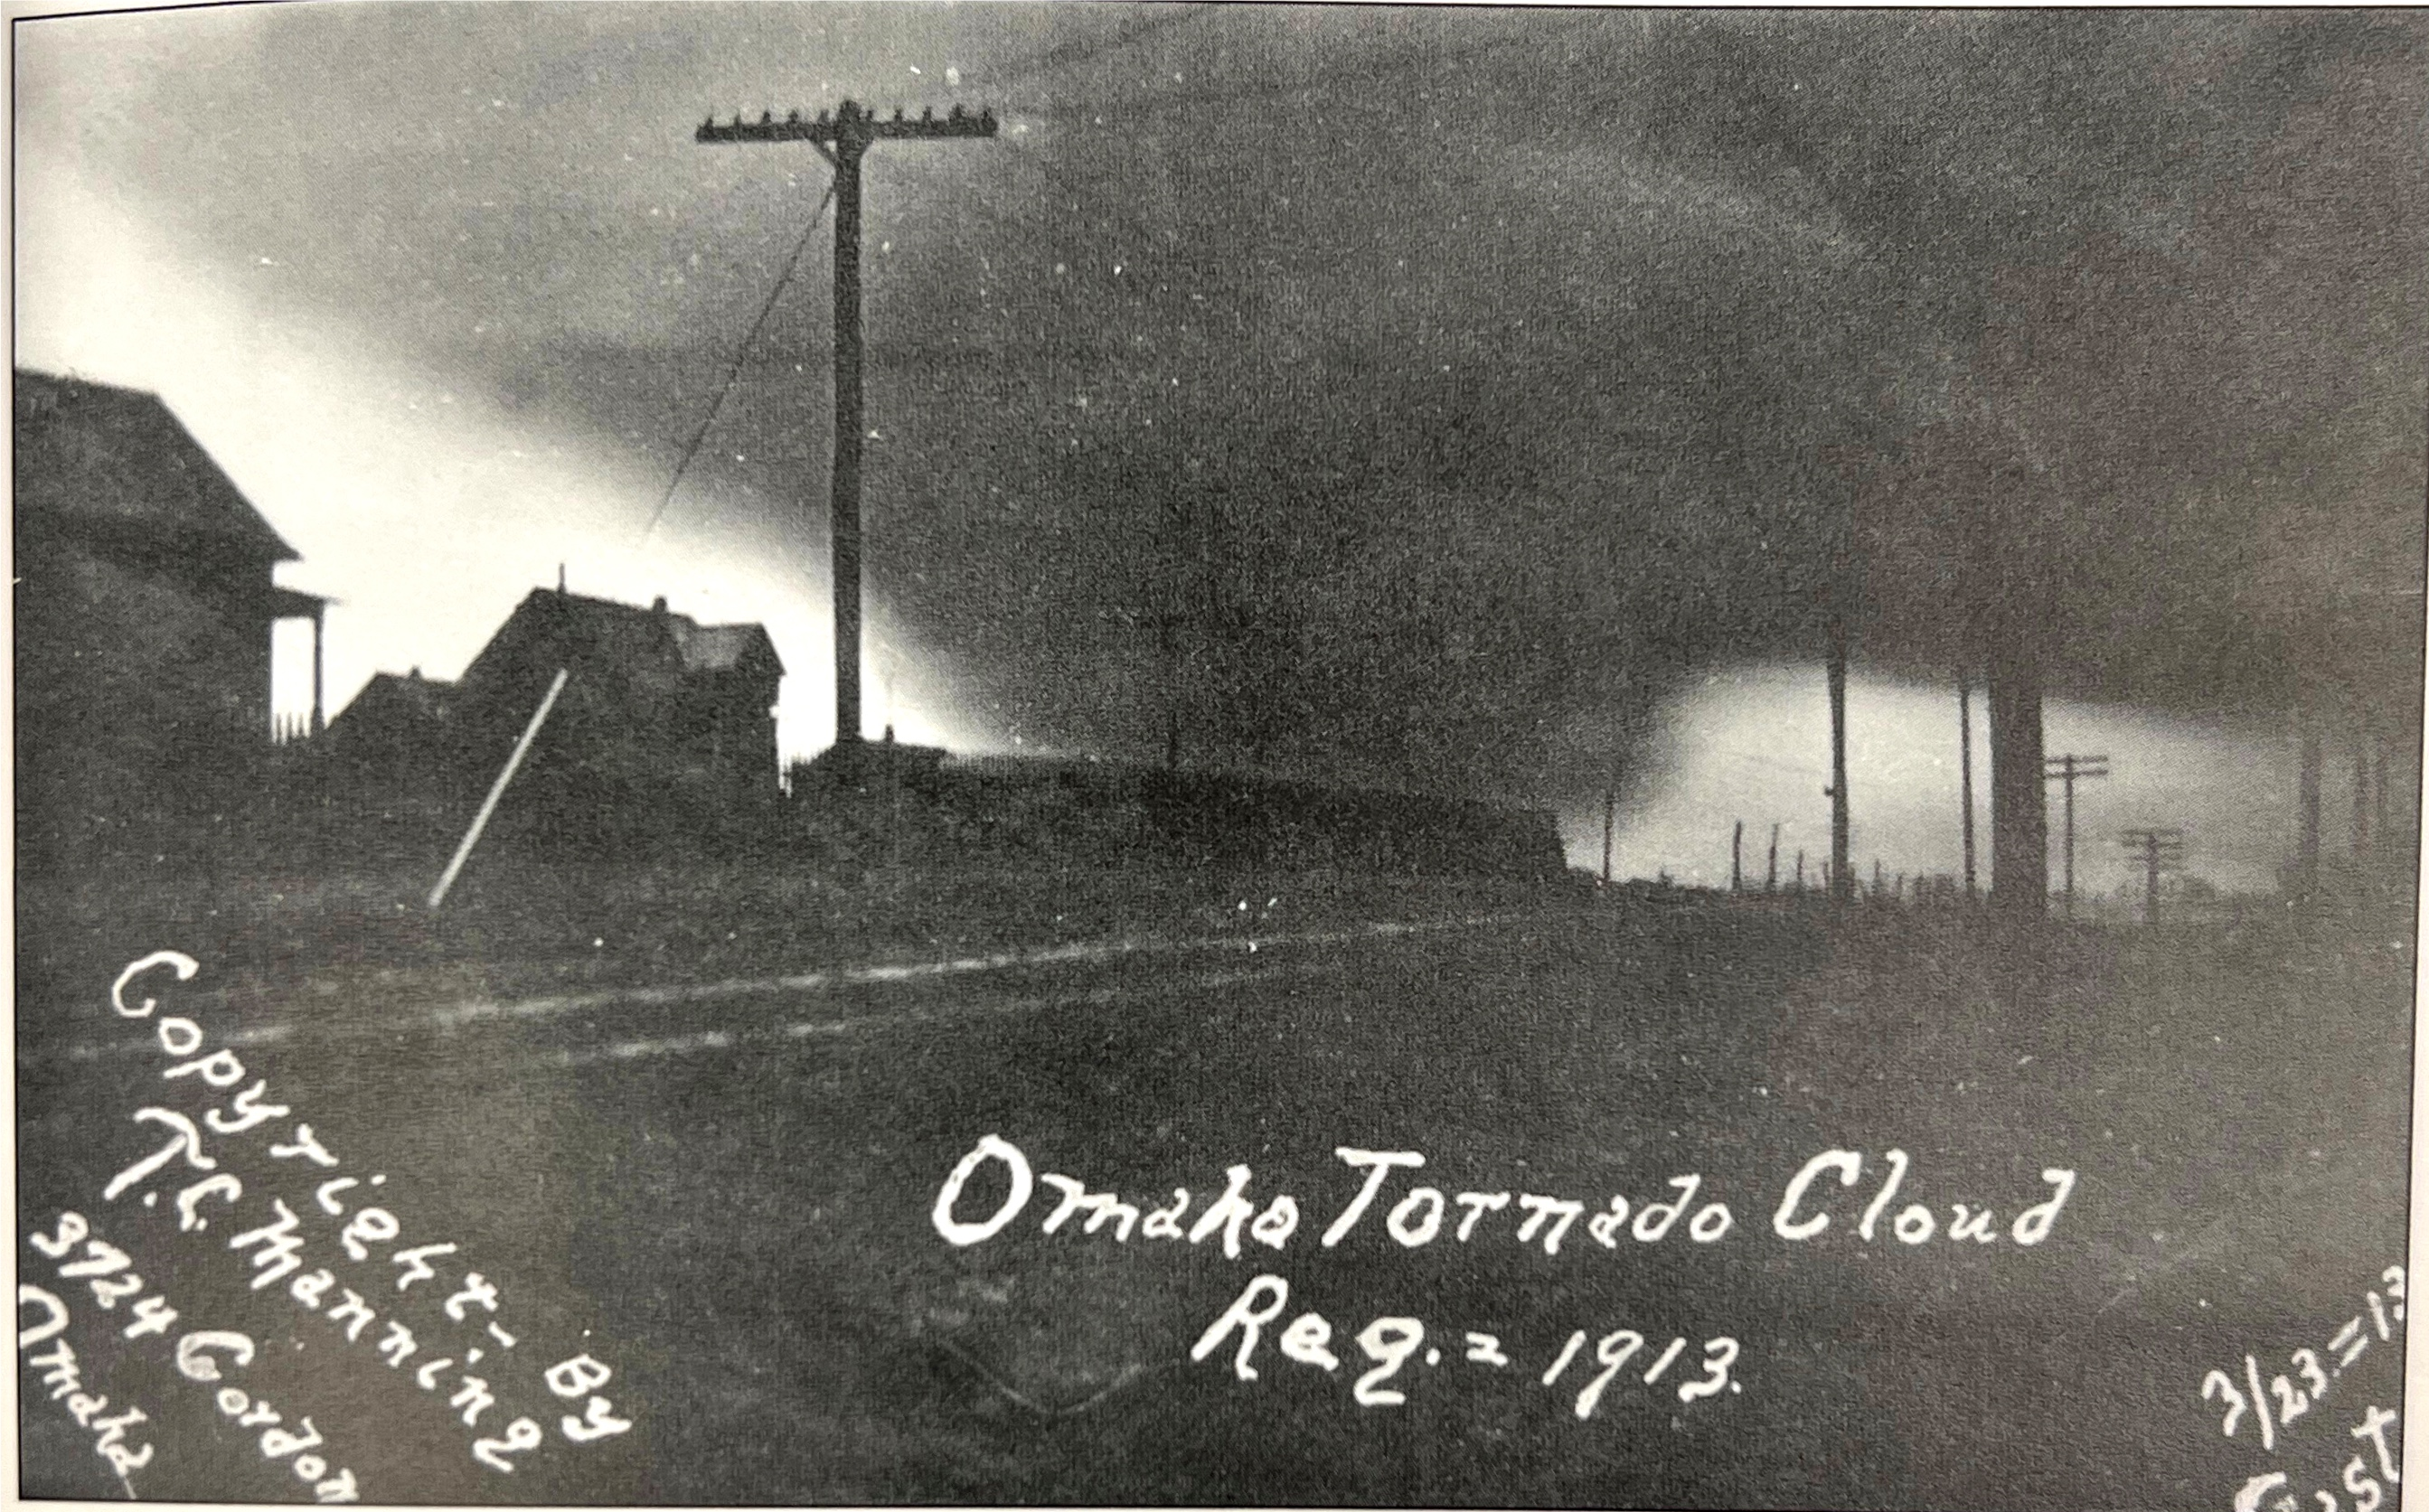 Photo of the Omaha tornado.  Location unknown.  